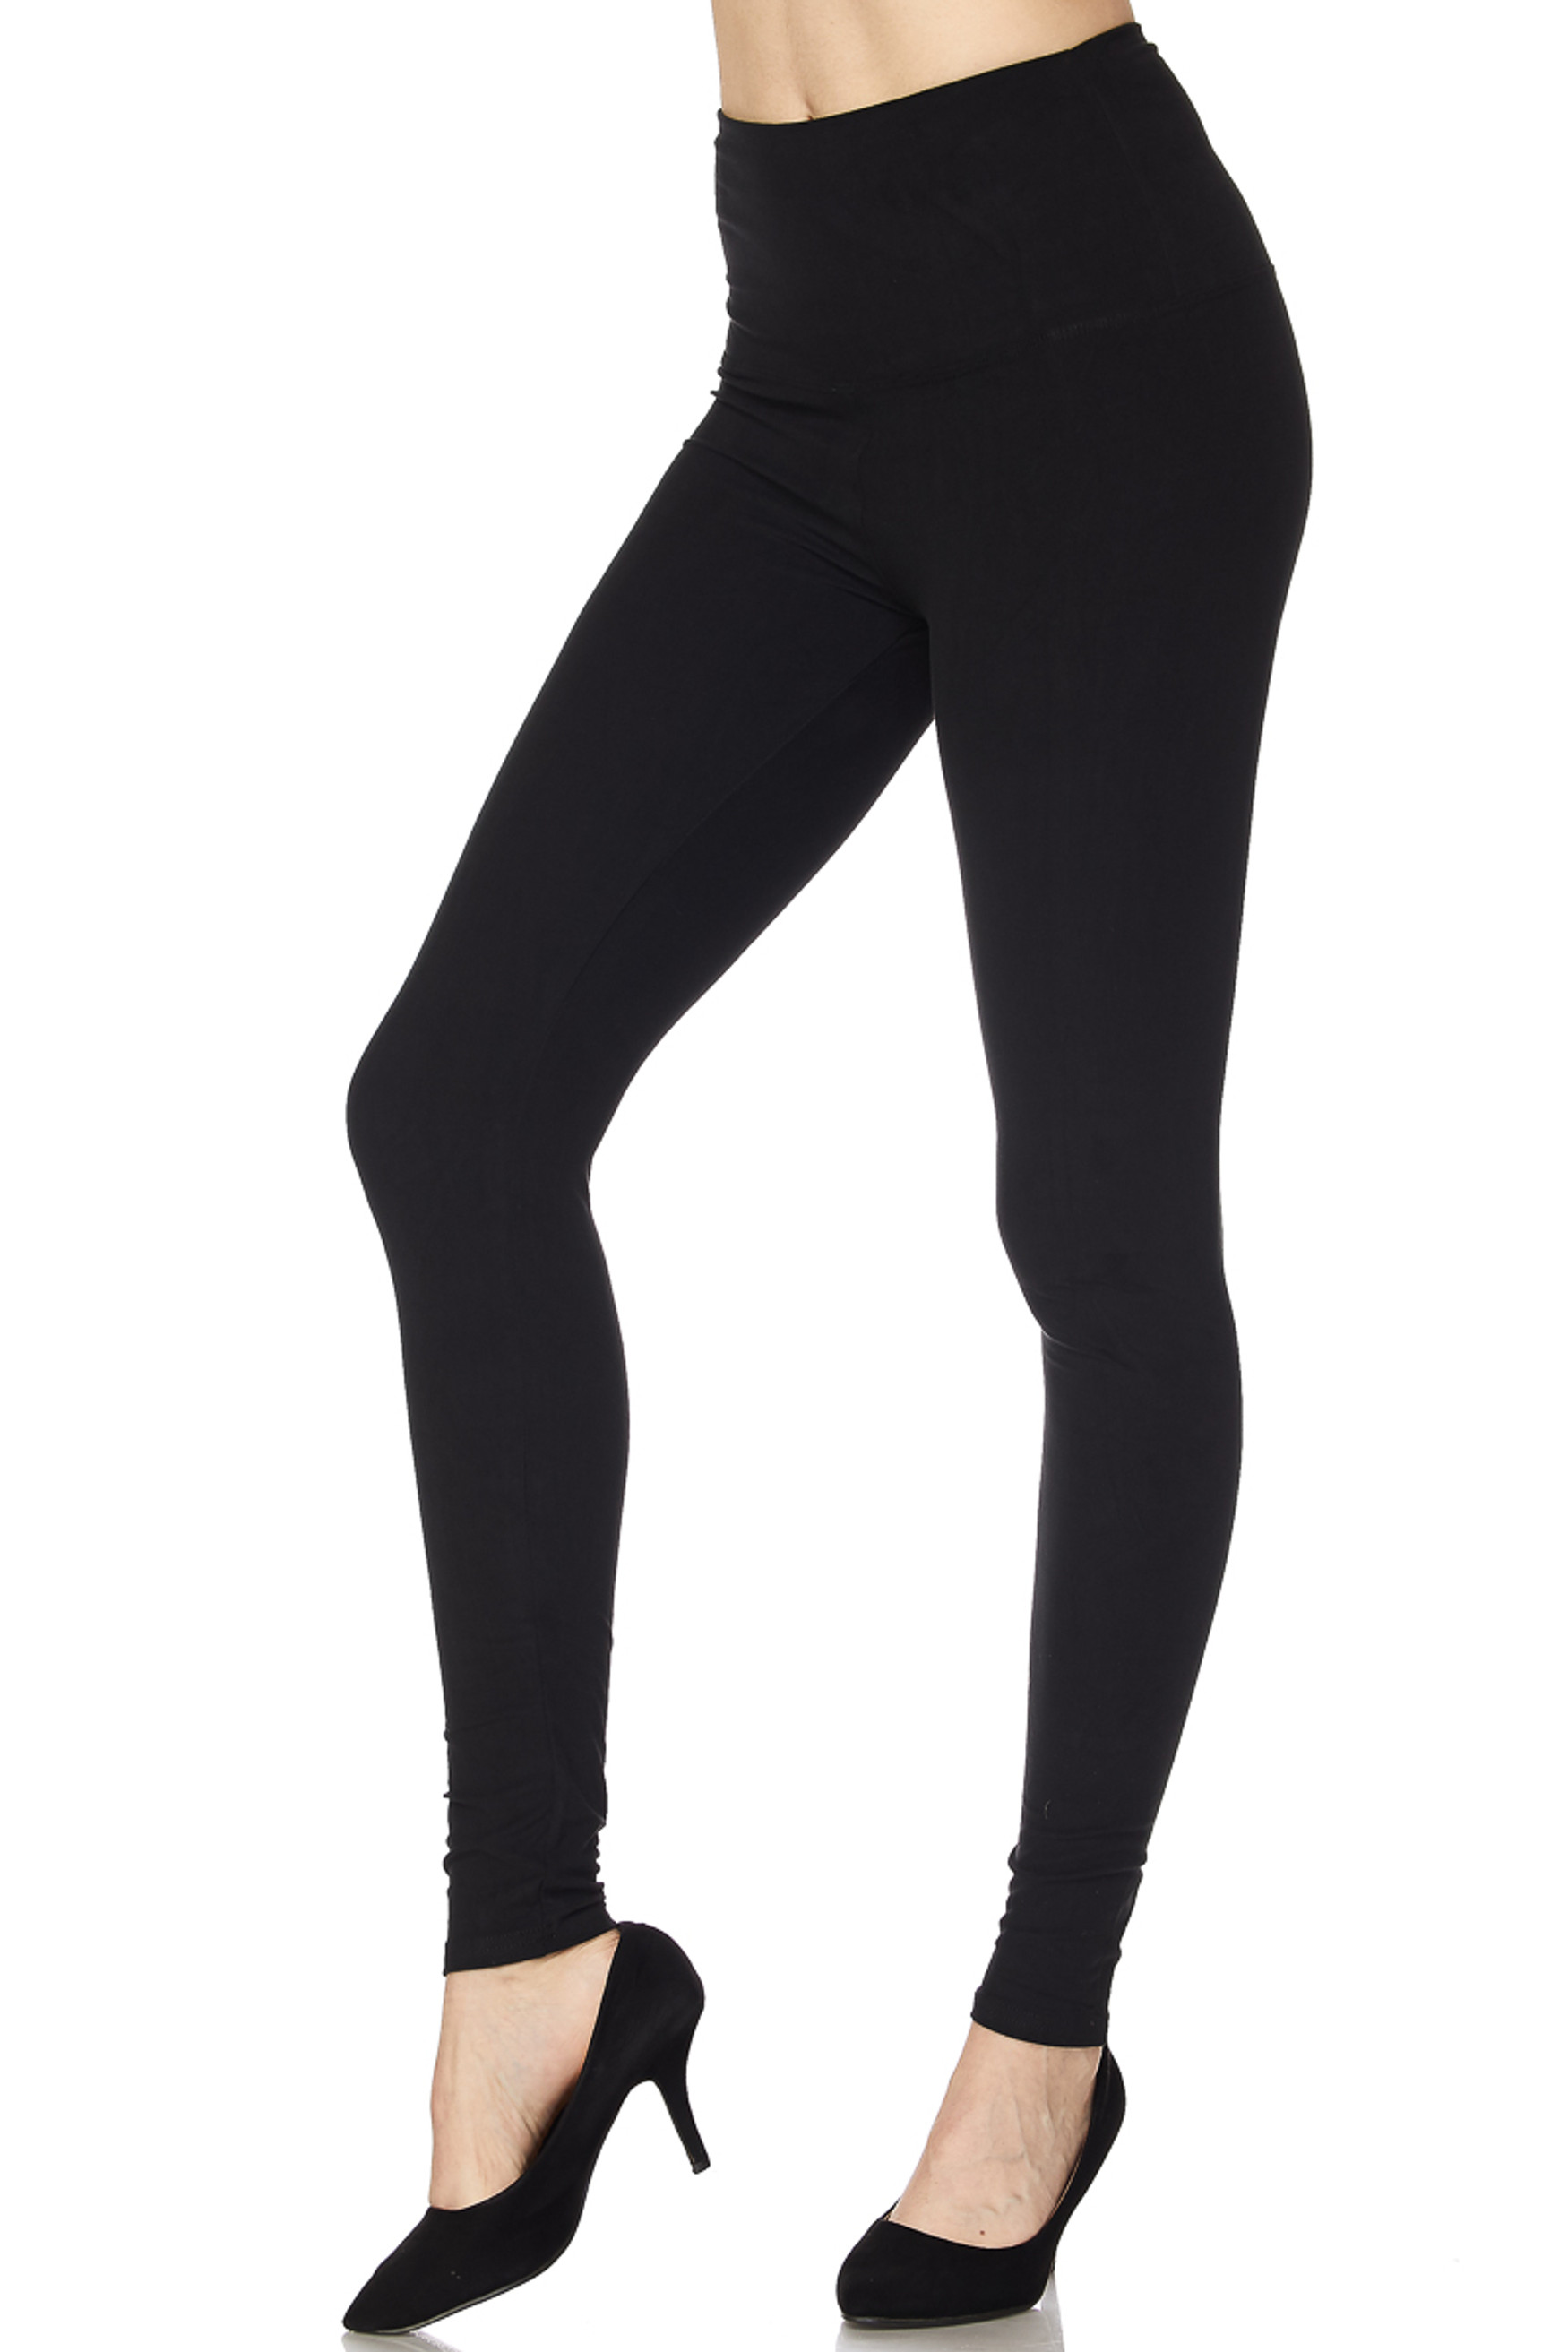 Brushed High Waisted Basic Solid Leggings - 5 Inch Waist